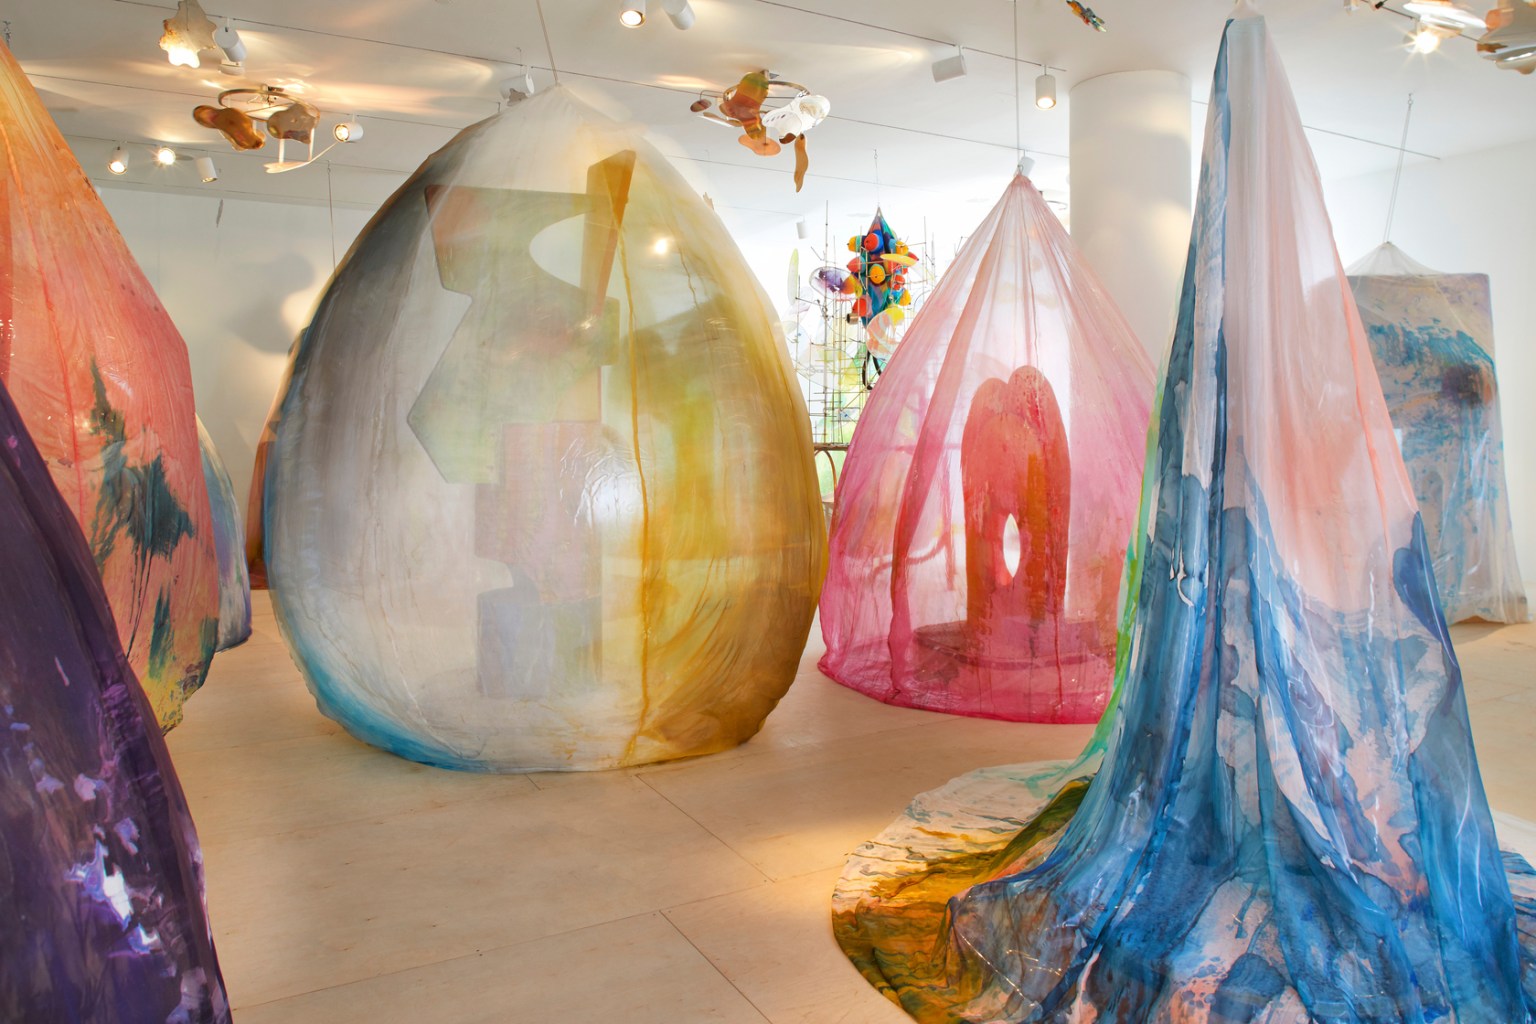 Abstract sculptures are draped in transparent textiles dyed with patterns of bright color.